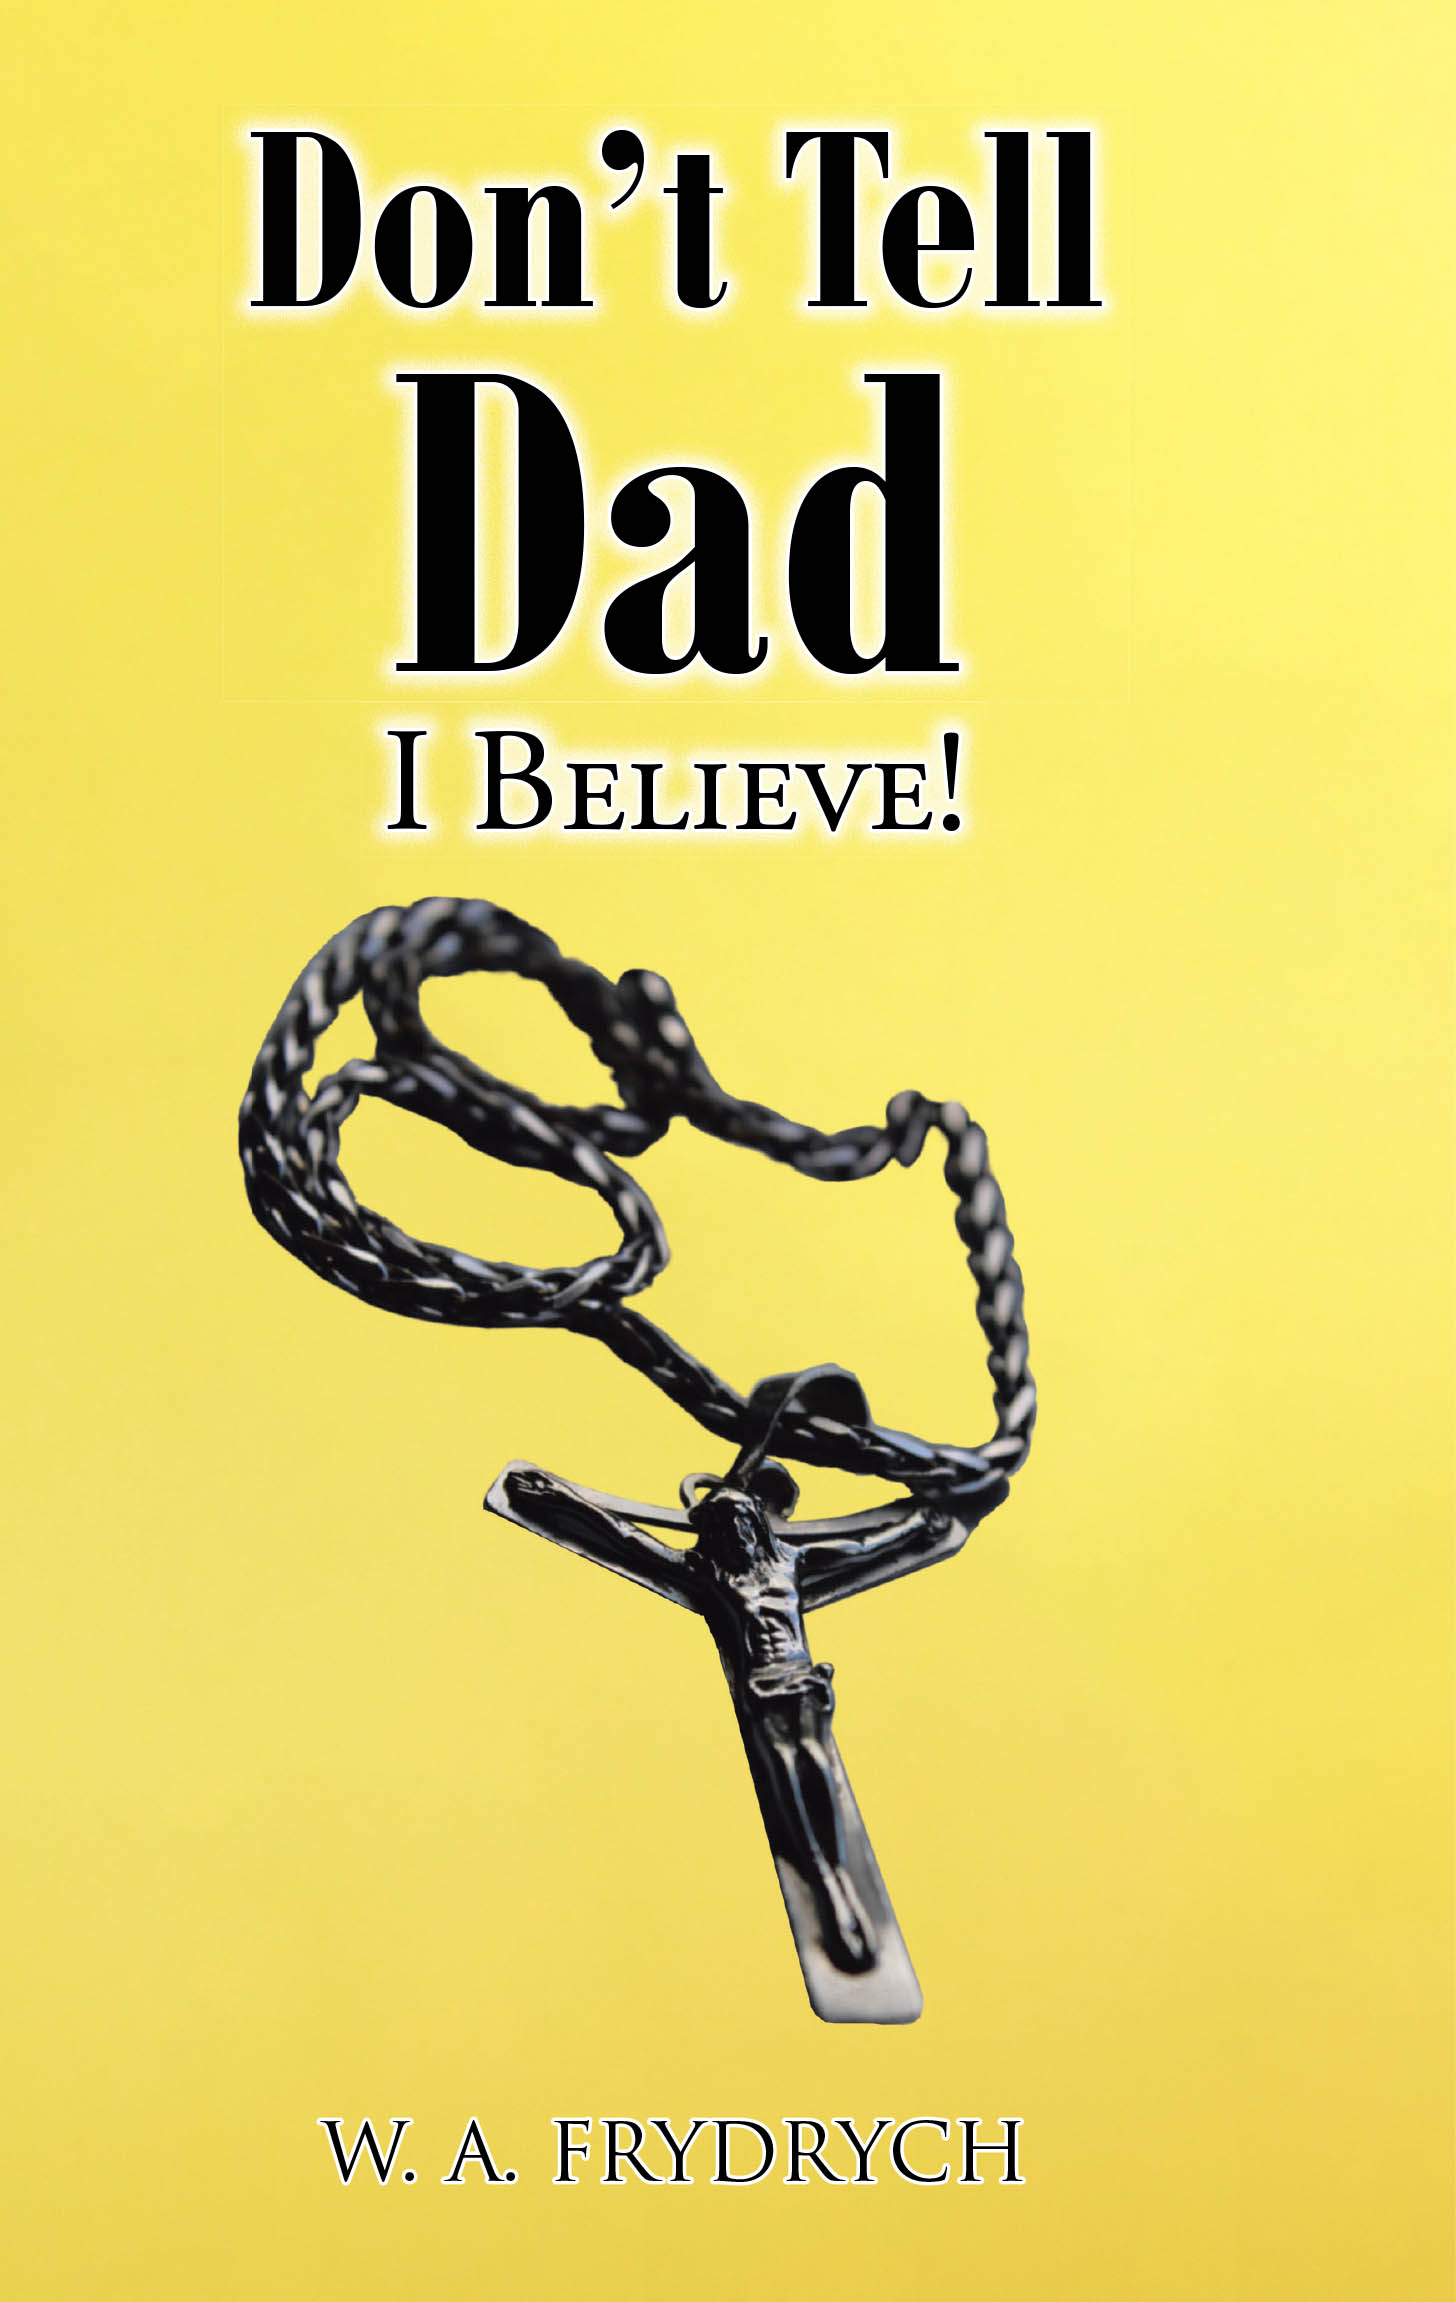 W. A. Frydrych’s Newly Released “Don’t Tell Dad: I BELIEVE!” is an Inspiring Story of Faith and Redemption